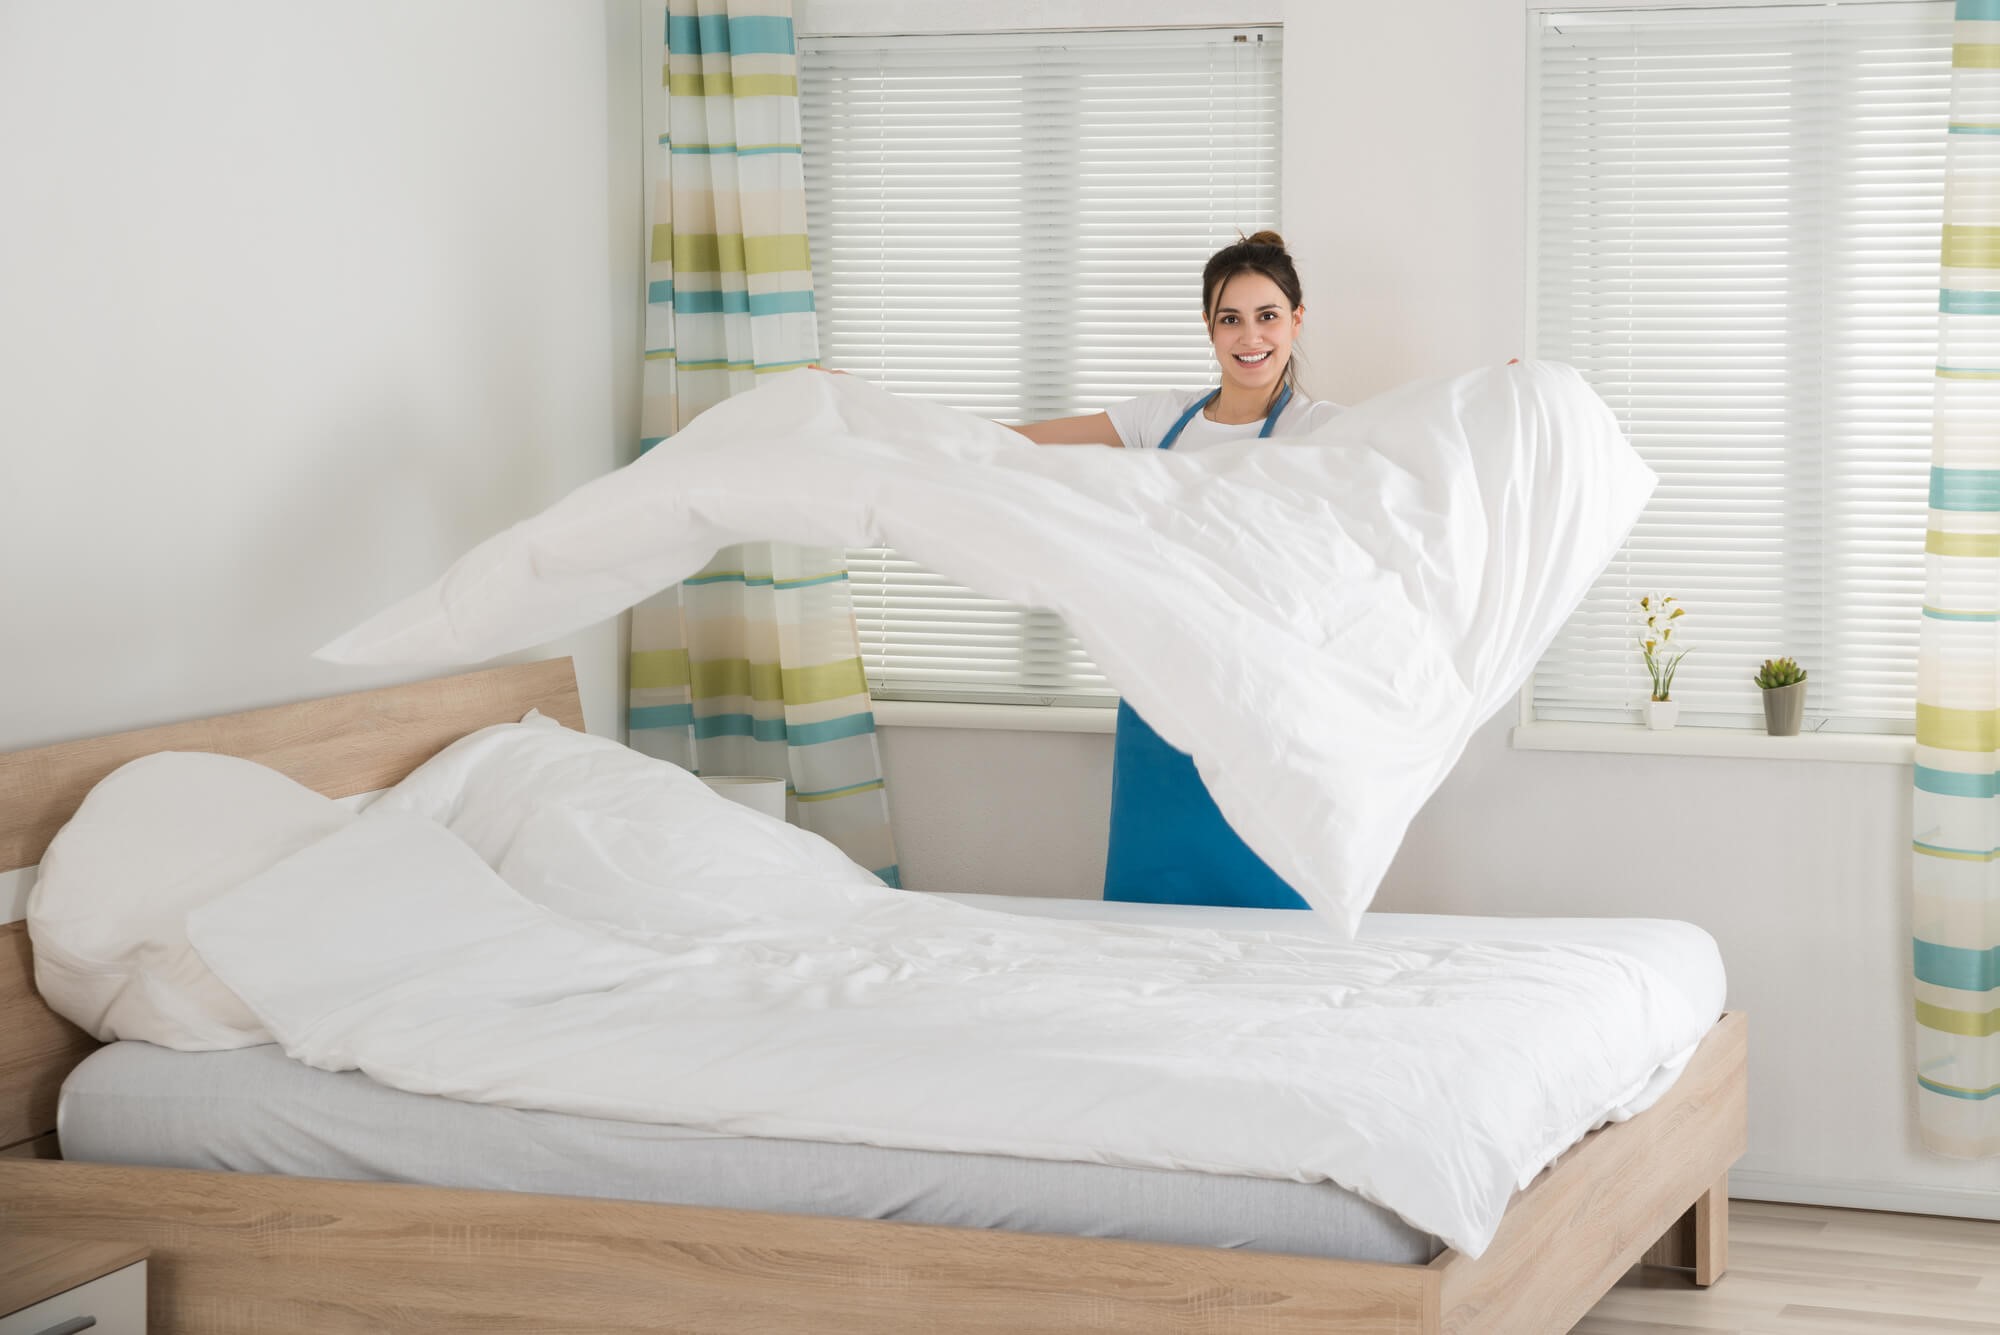 How to Get Urine Stain & Pee Smell Out of a Mattress: 6 Easy Steps